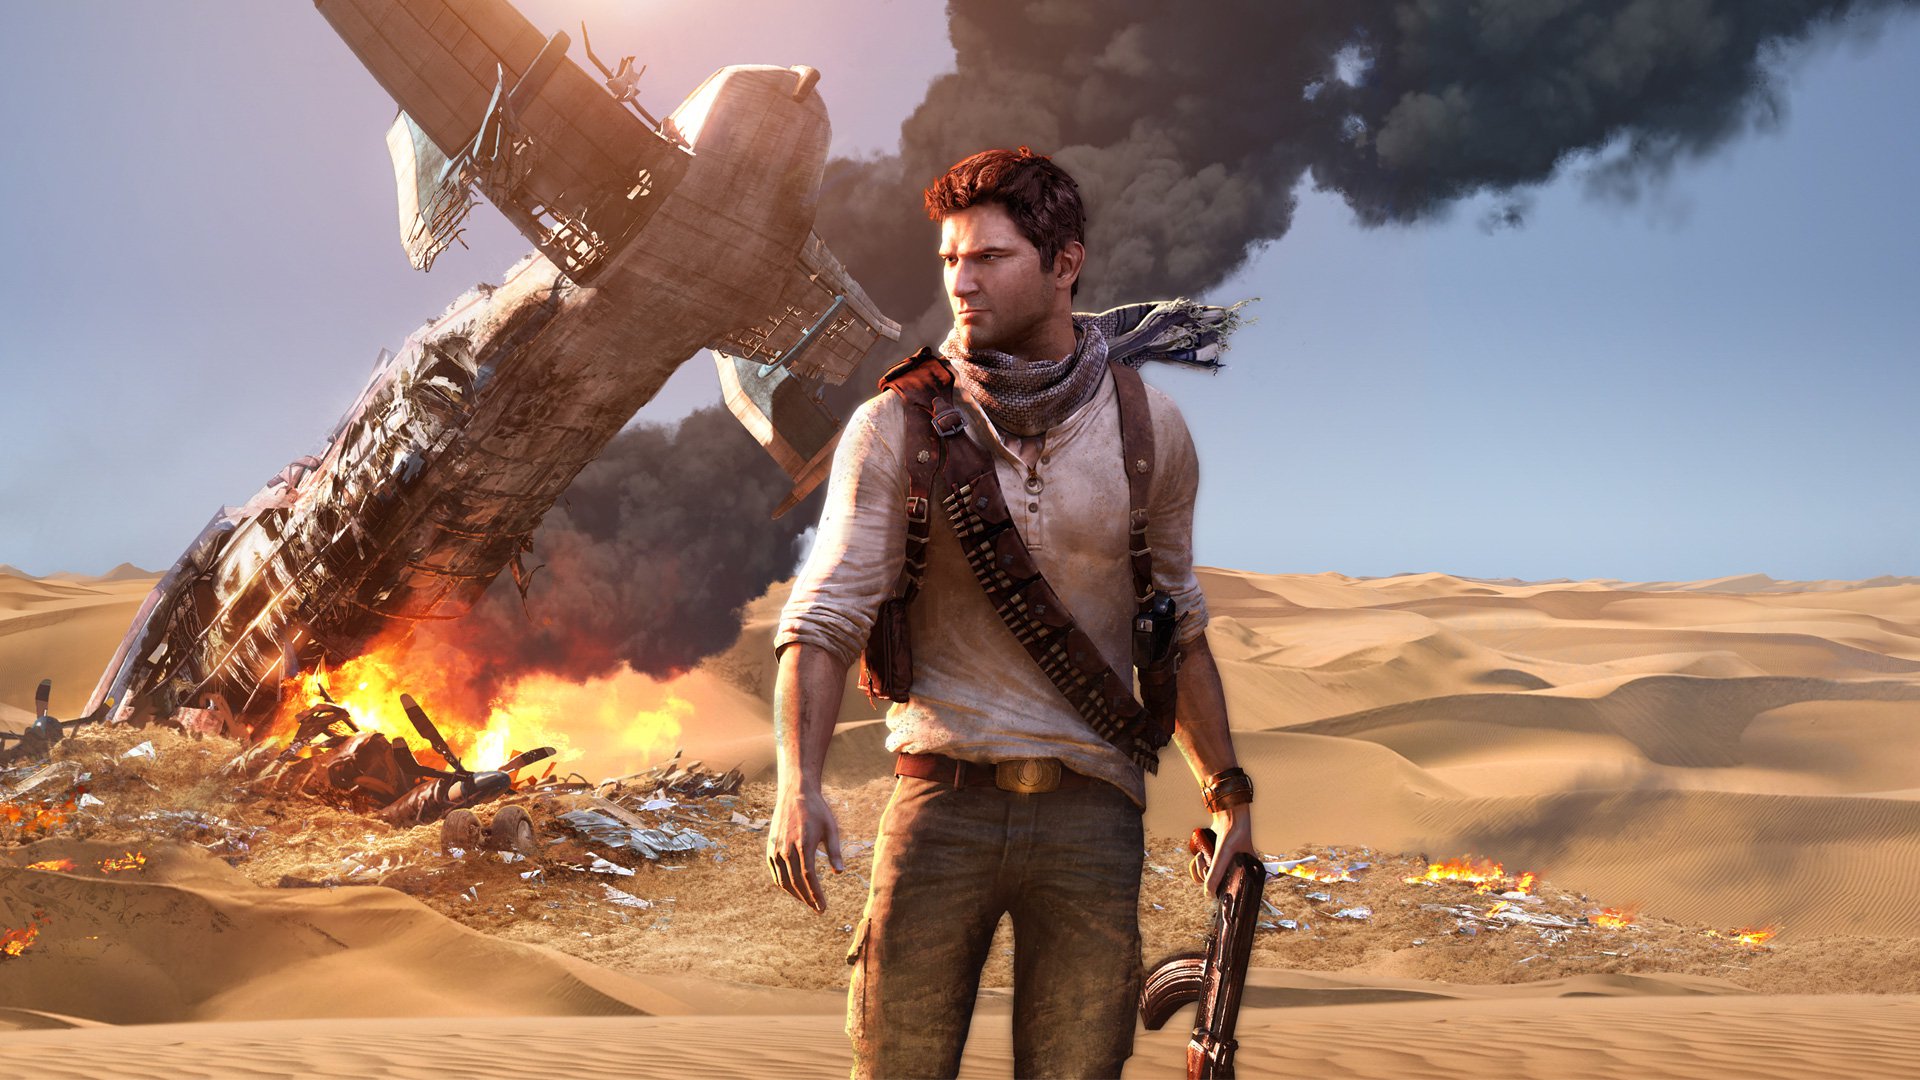 Uncharted 3 full game download pc